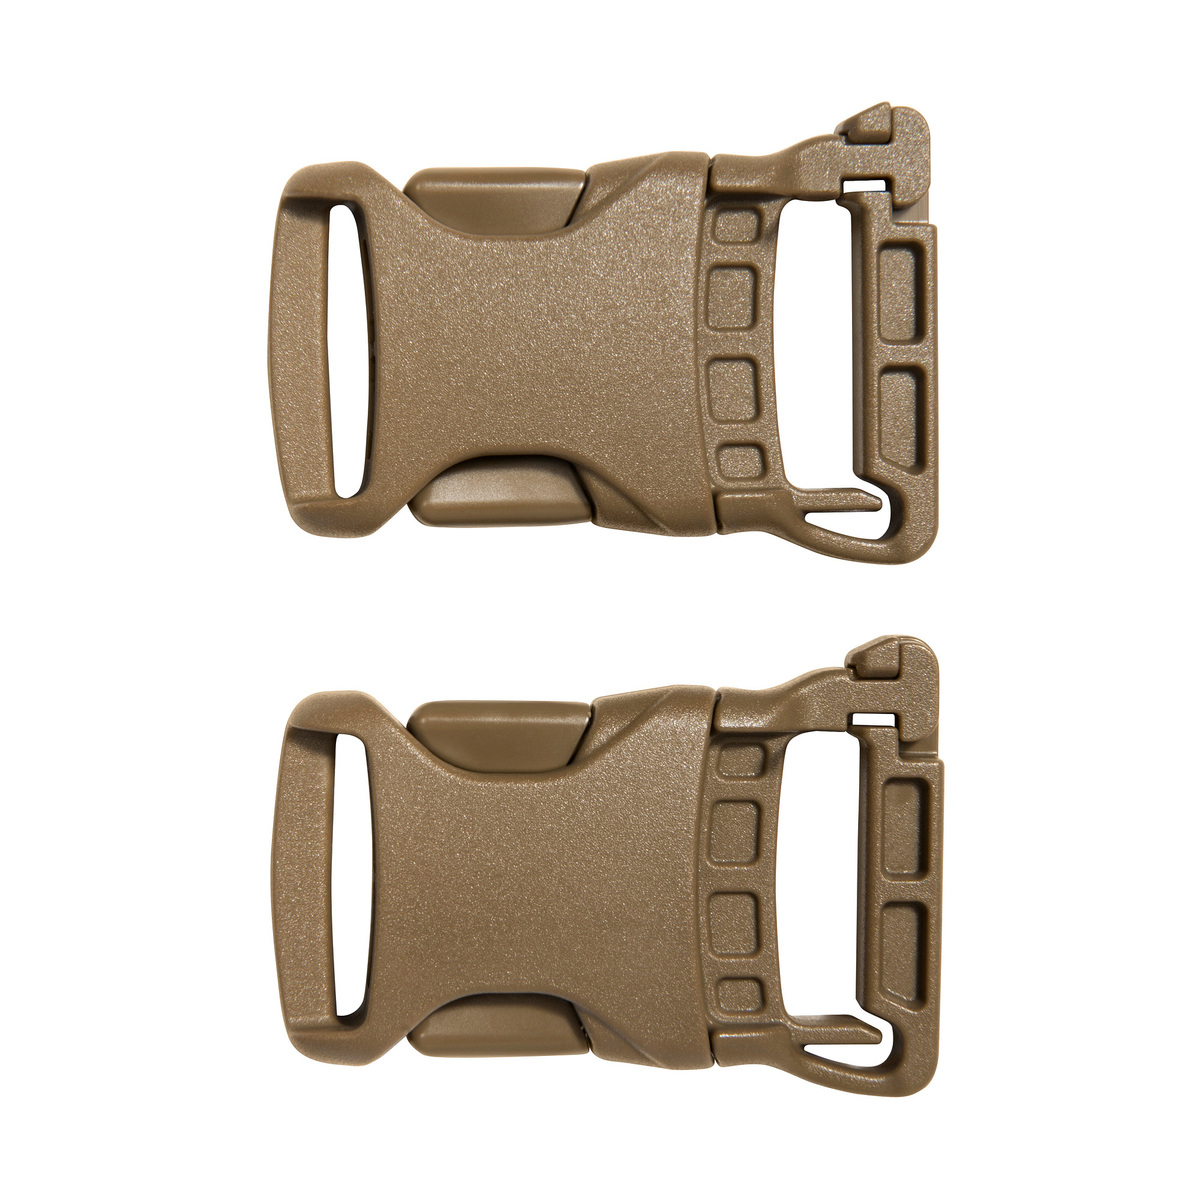 SR 25 Safety QA Coyote brown